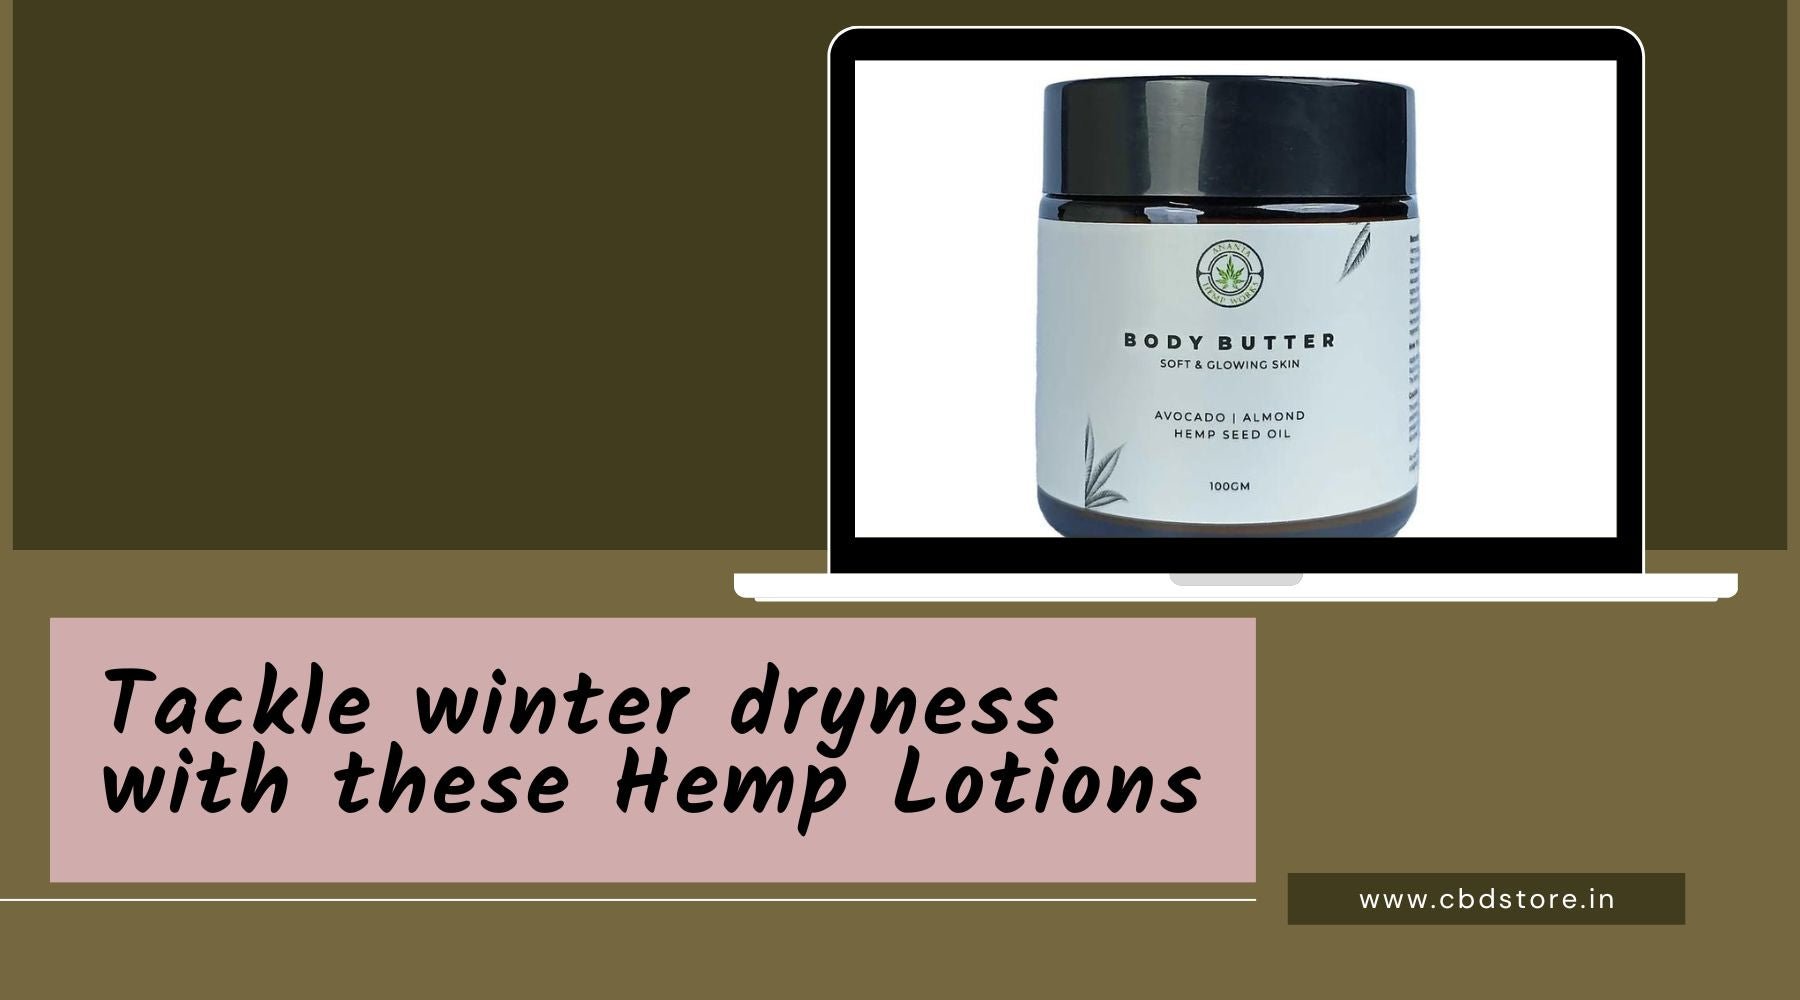 Tackle winter dryness with these Hemp Lotions - CBD Store India